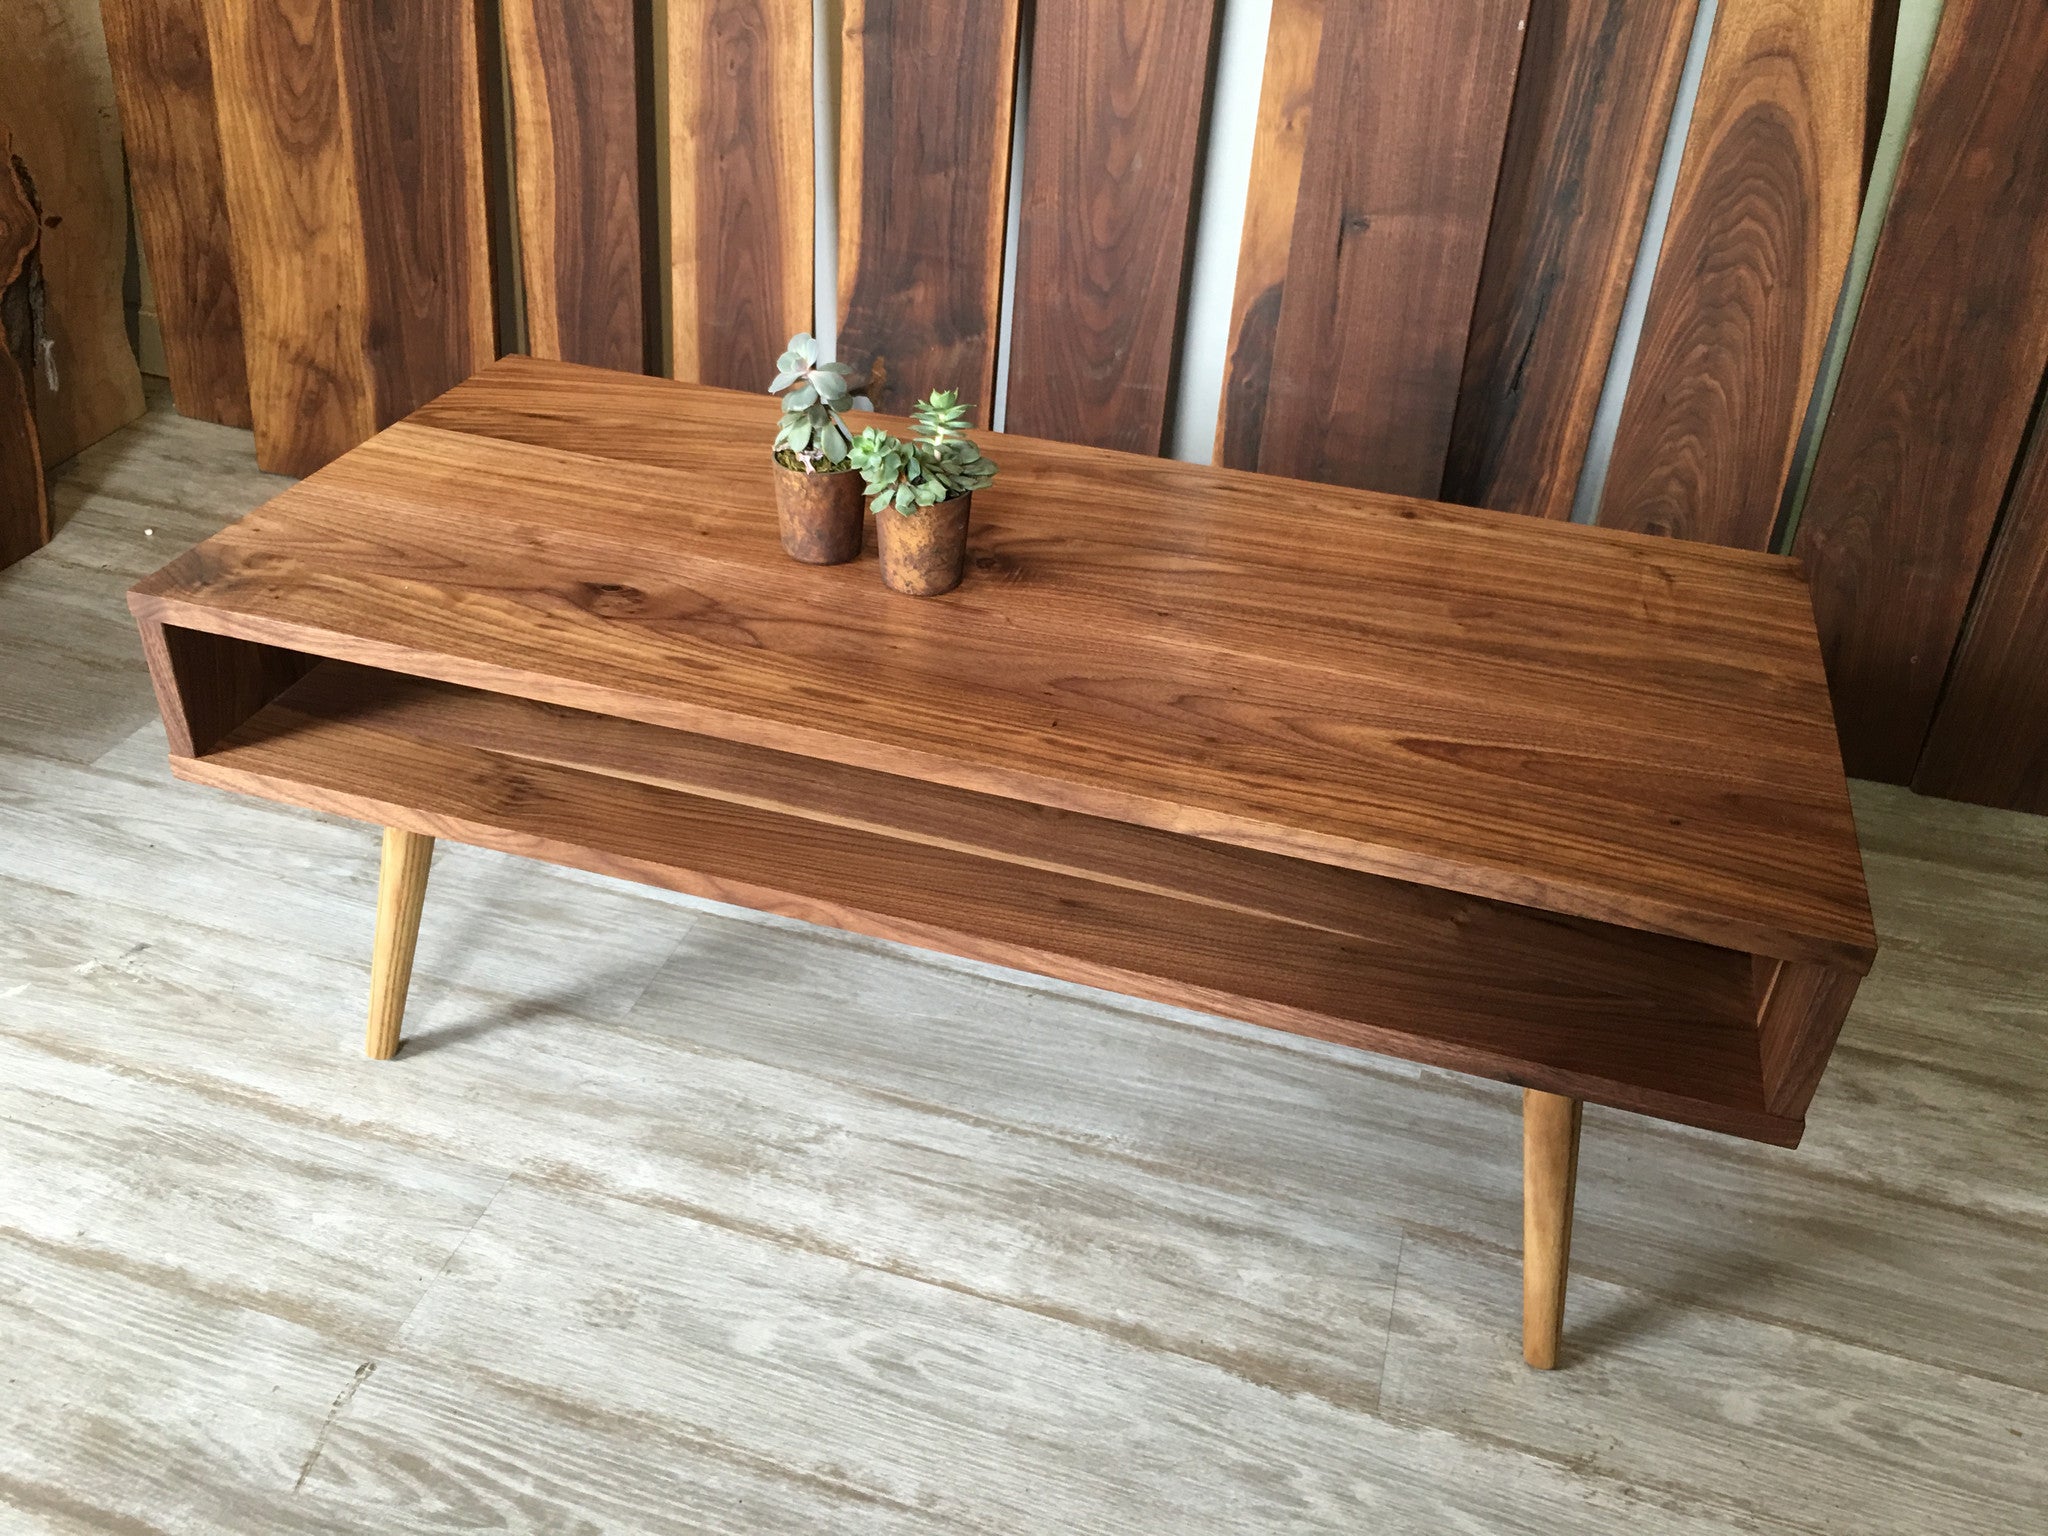 Classic Mid Century Modern Coffee Table - JeremiahCollection - 4